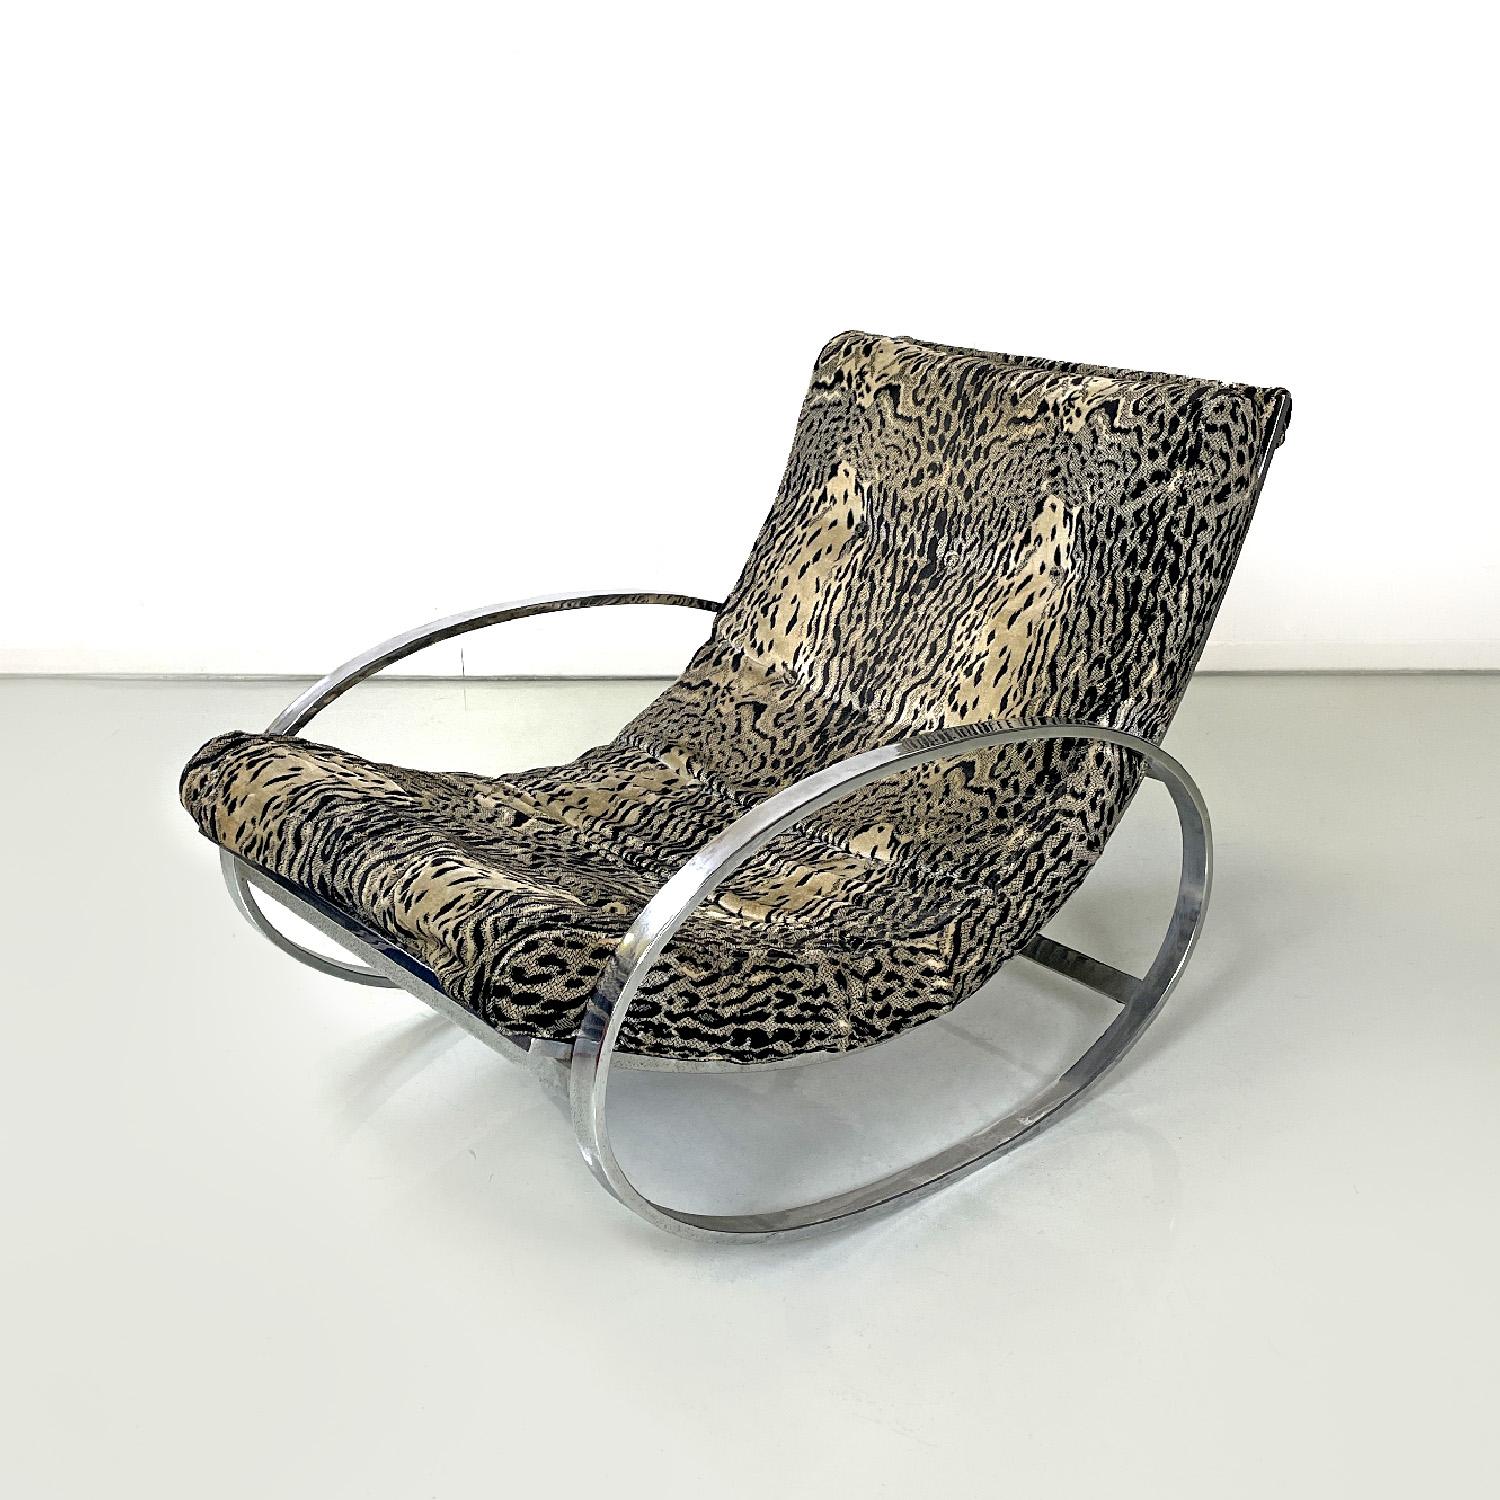 Italian modern tiger print rocking armchair Ellipse Renato Zevi for Selig, 1970s
Rocking armchair mod. Ellipse. The structure is in chromed metal and is composed of two side ellipses on which the session rests and which allow the swinging movement